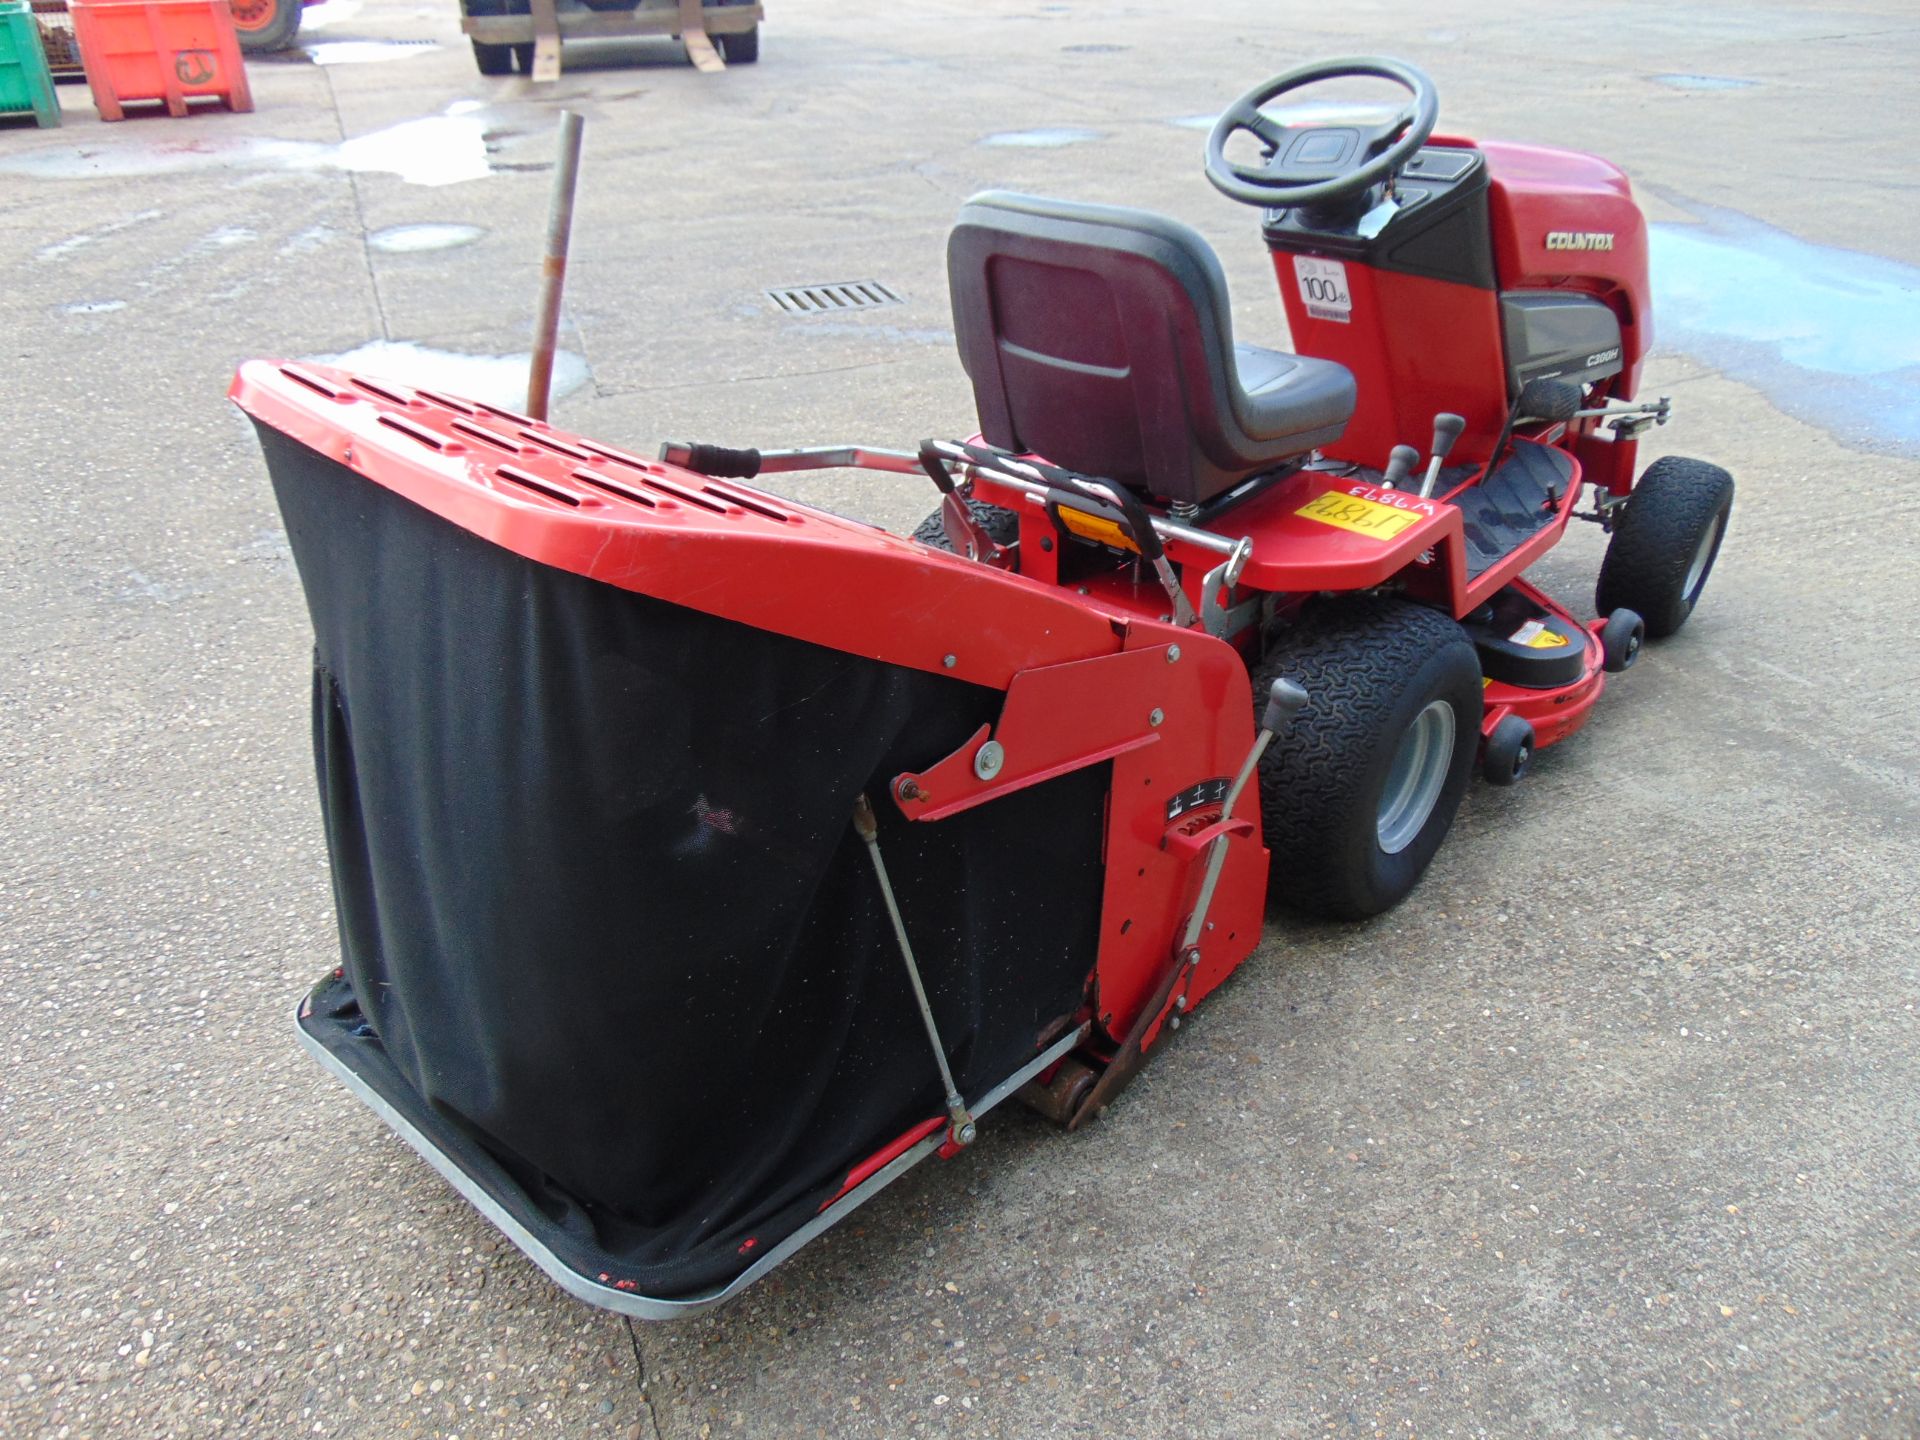 Countax C300H Hydrostatic Ride On Mower with Rear Brush and Grass Collector ONLY 393 HOURS!!! - Image 8 of 18